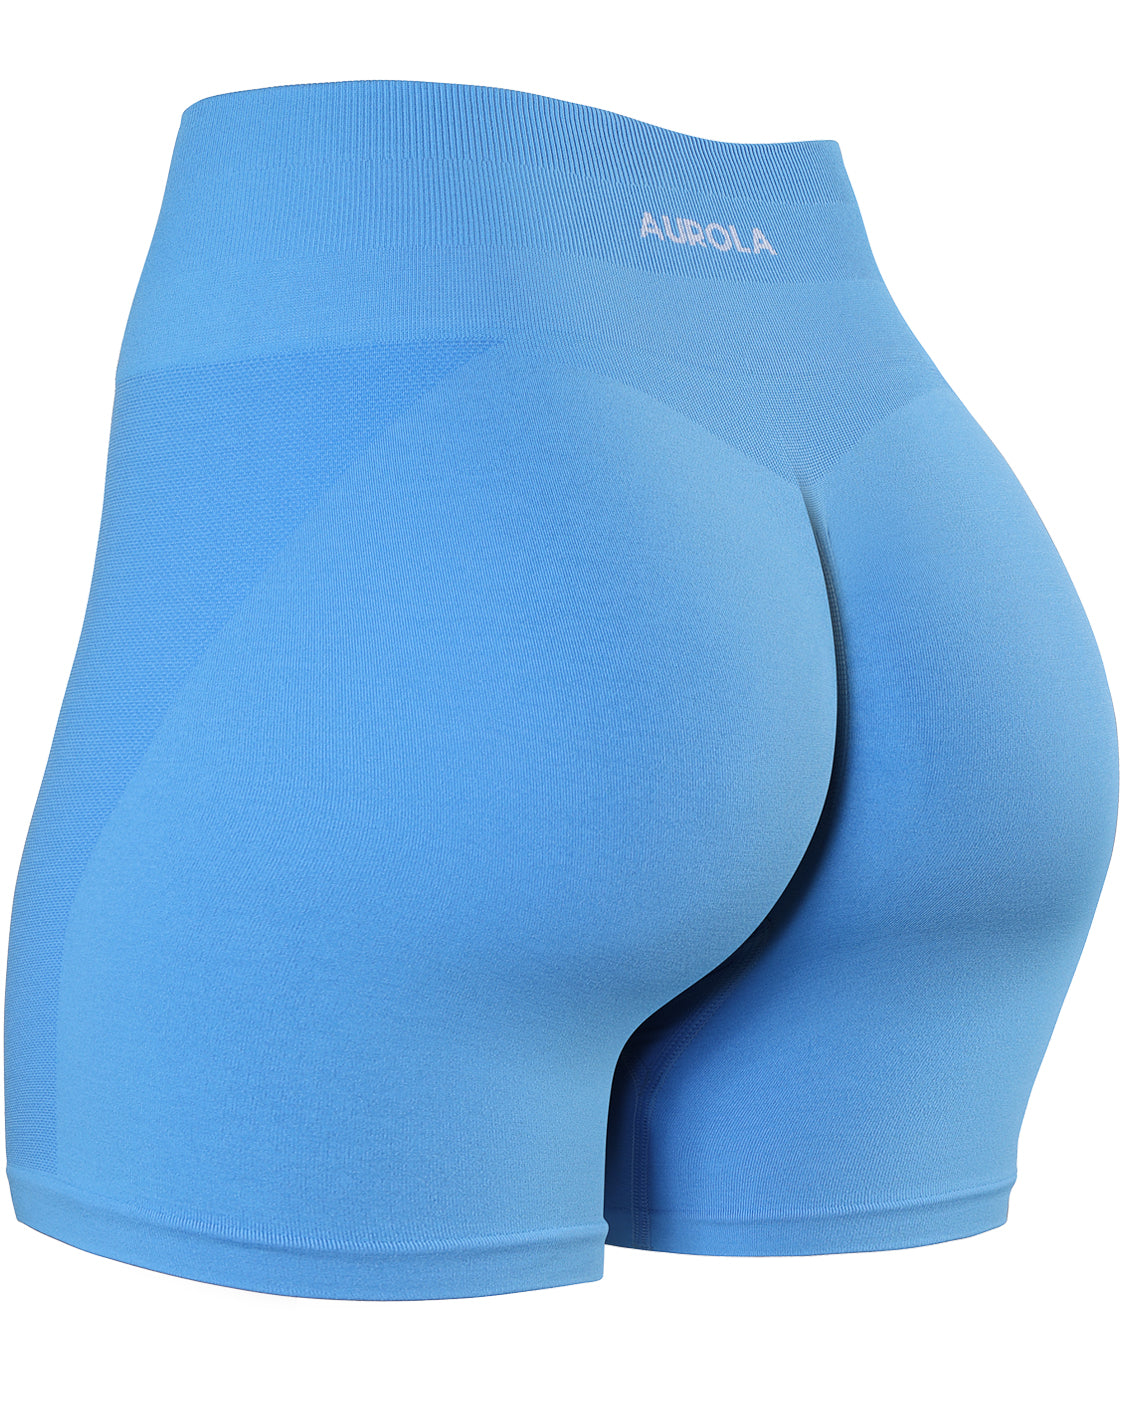 AUROLA Intensify Short Women's Athletic Seamless High Waisted Running  Sporty Gym Fitness Yoga Elastic Workout Shorts 3.6 - ShopStyle